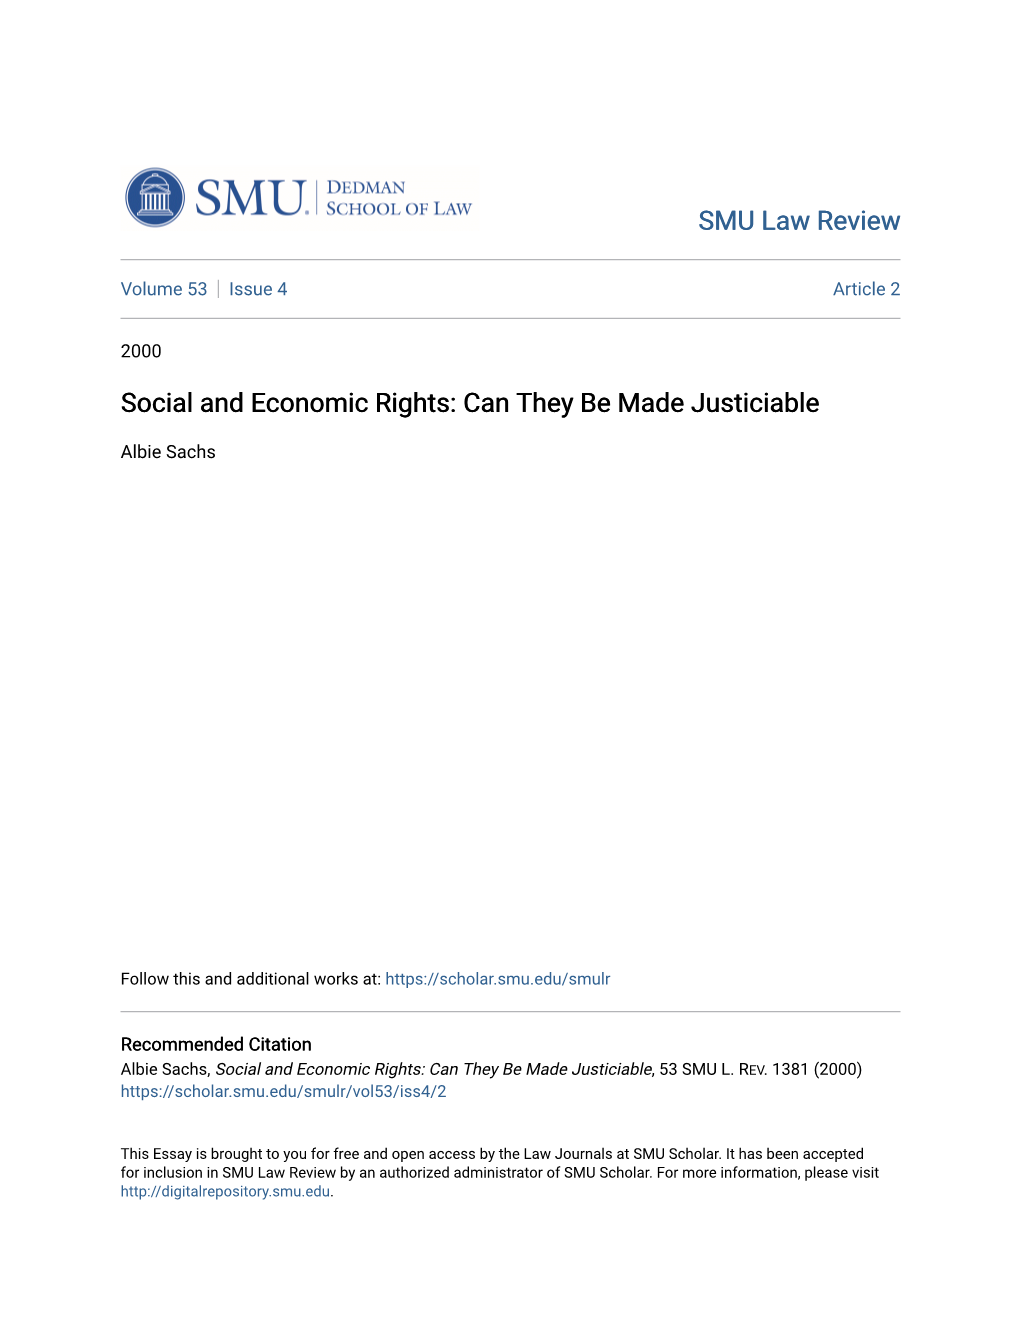 Social and Economic Rights: Can They Be Made Justiciable